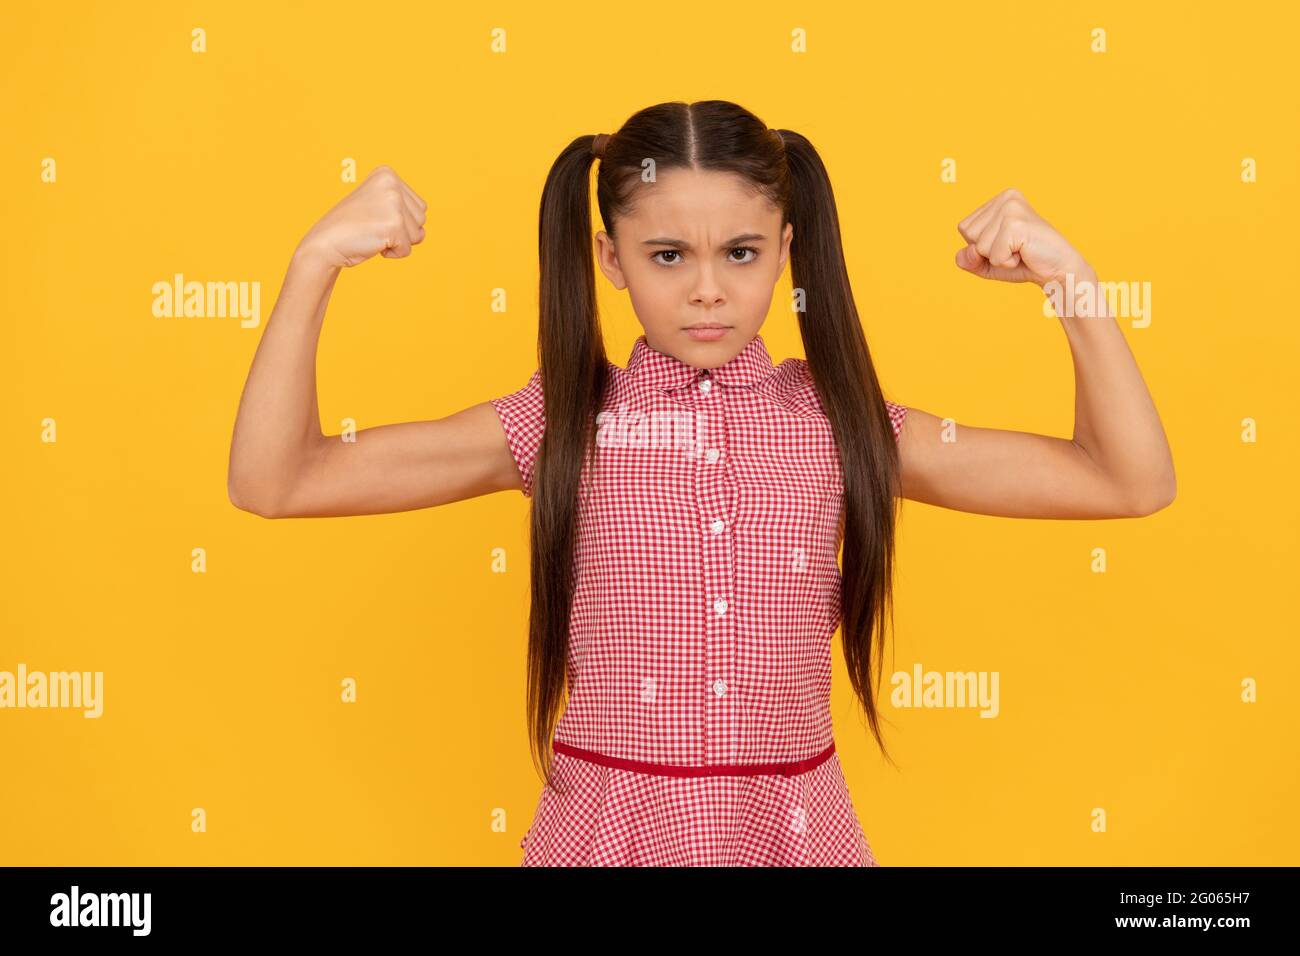 Serious girl child show strength gesture flexing arms yellow background, girl power Stock Photo